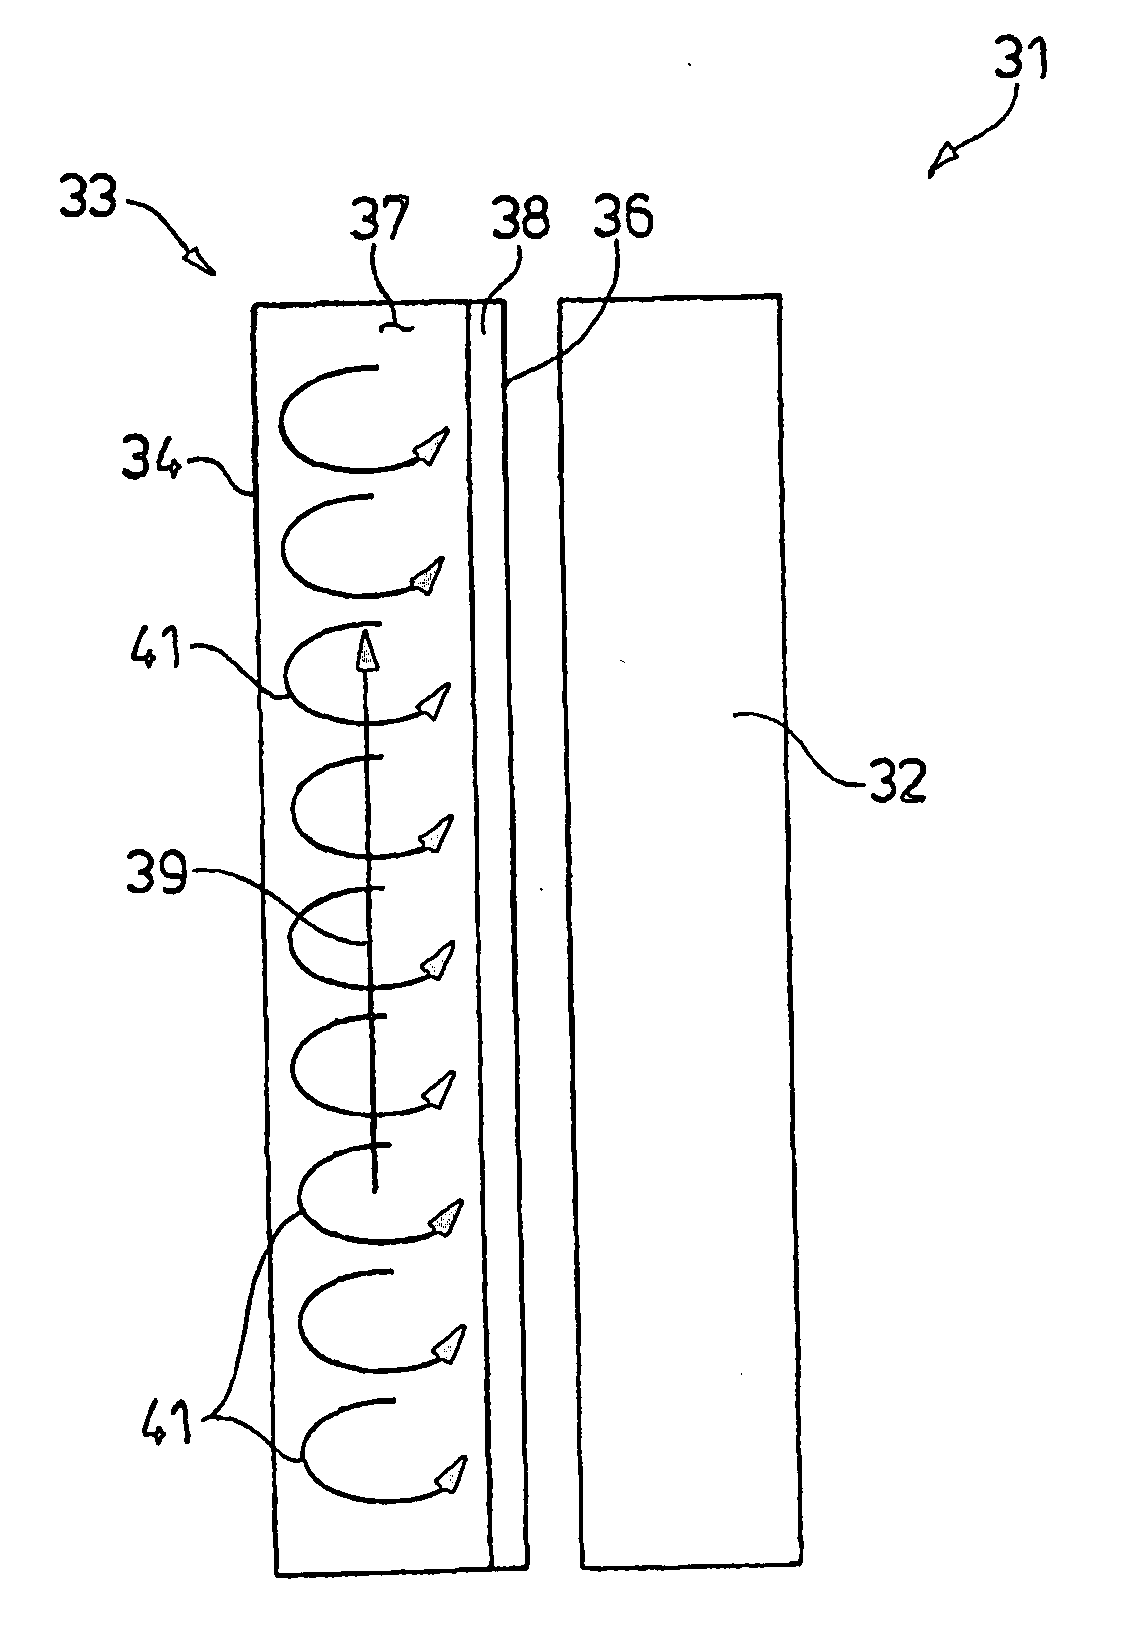 Method of inactivating microorganisms in a fluid using ultraviolet radiation